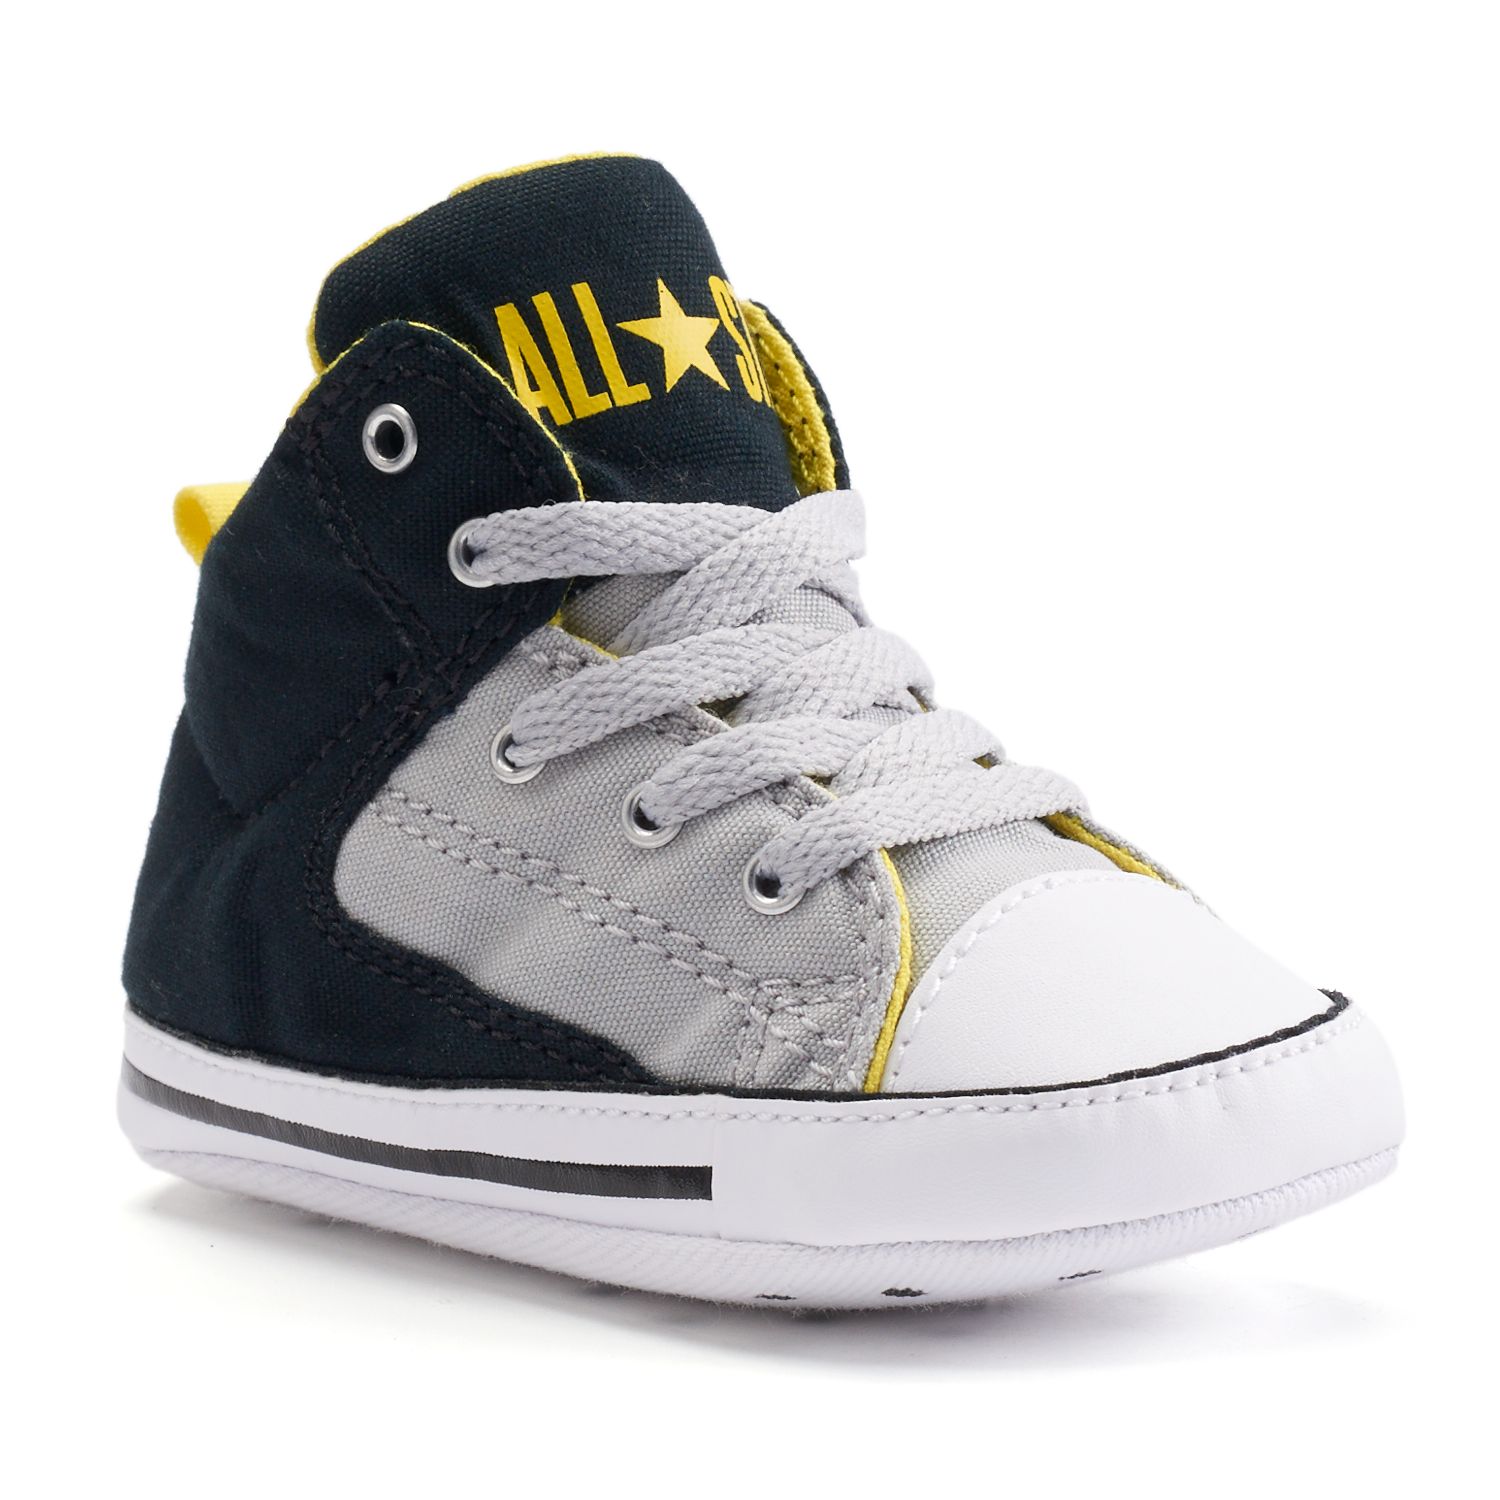 baby converse first star crib shoes